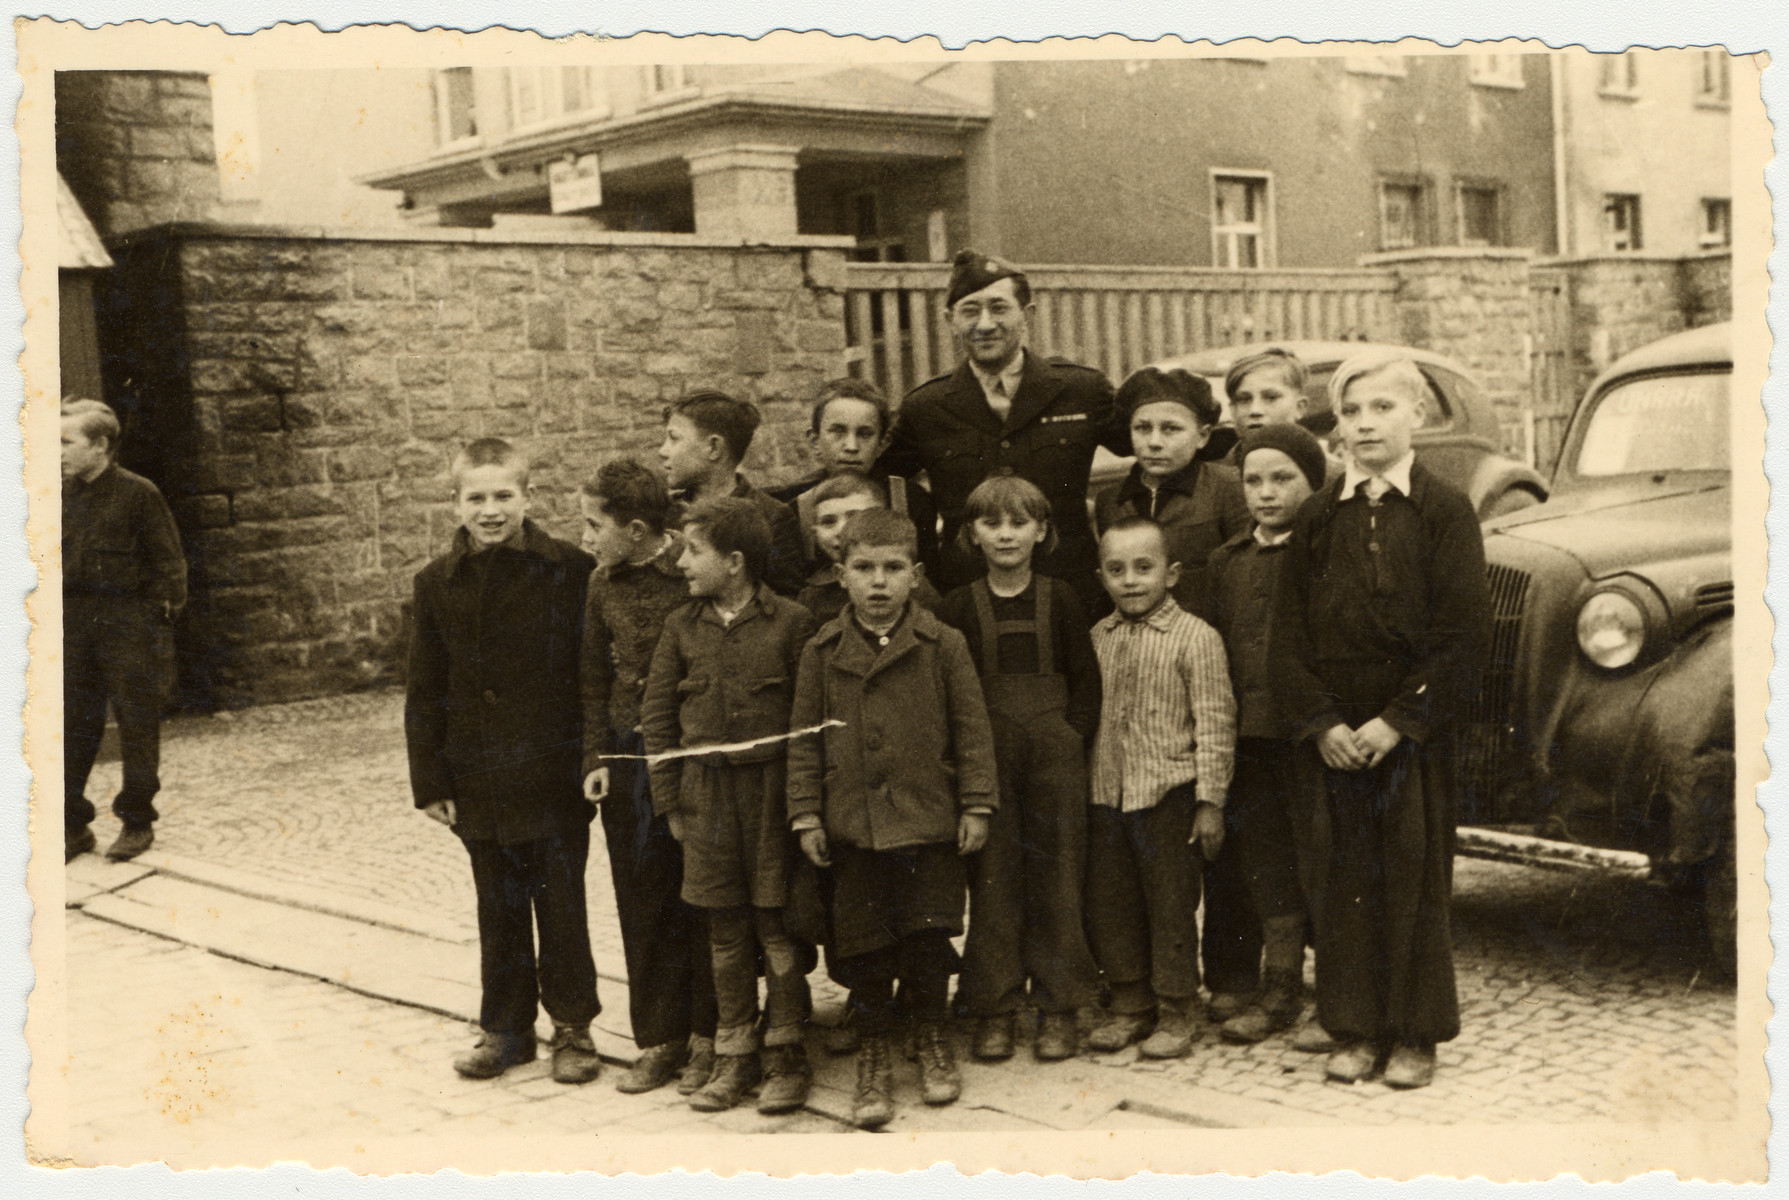 Mordecai Schwartz poses with a group of children in the Aschaffenburg displaced persons' camp.